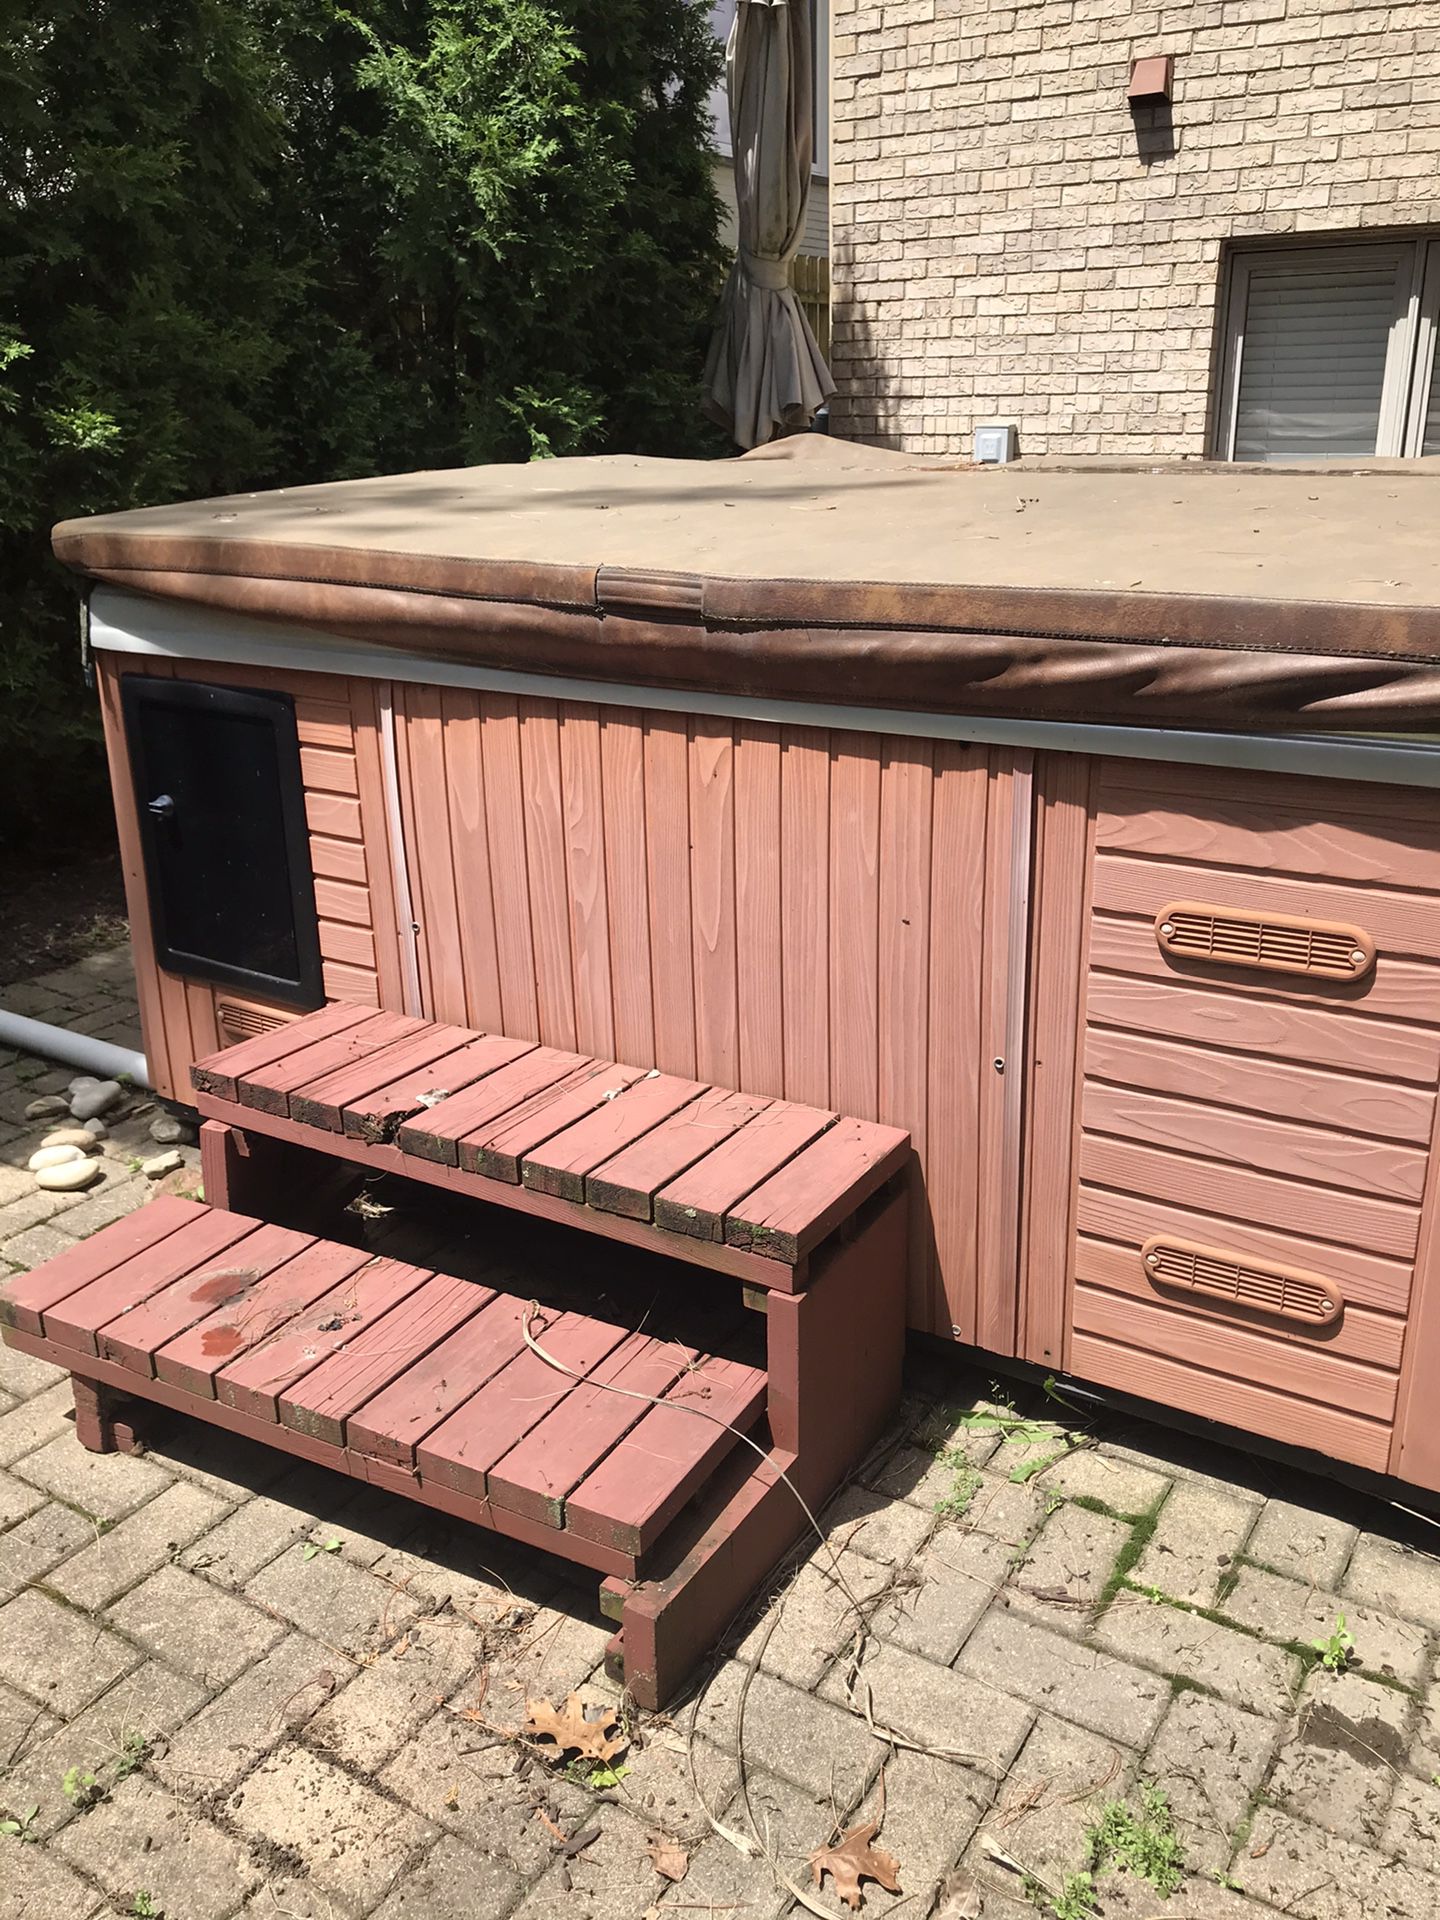 8 person hot tub - FREE for repair or parts